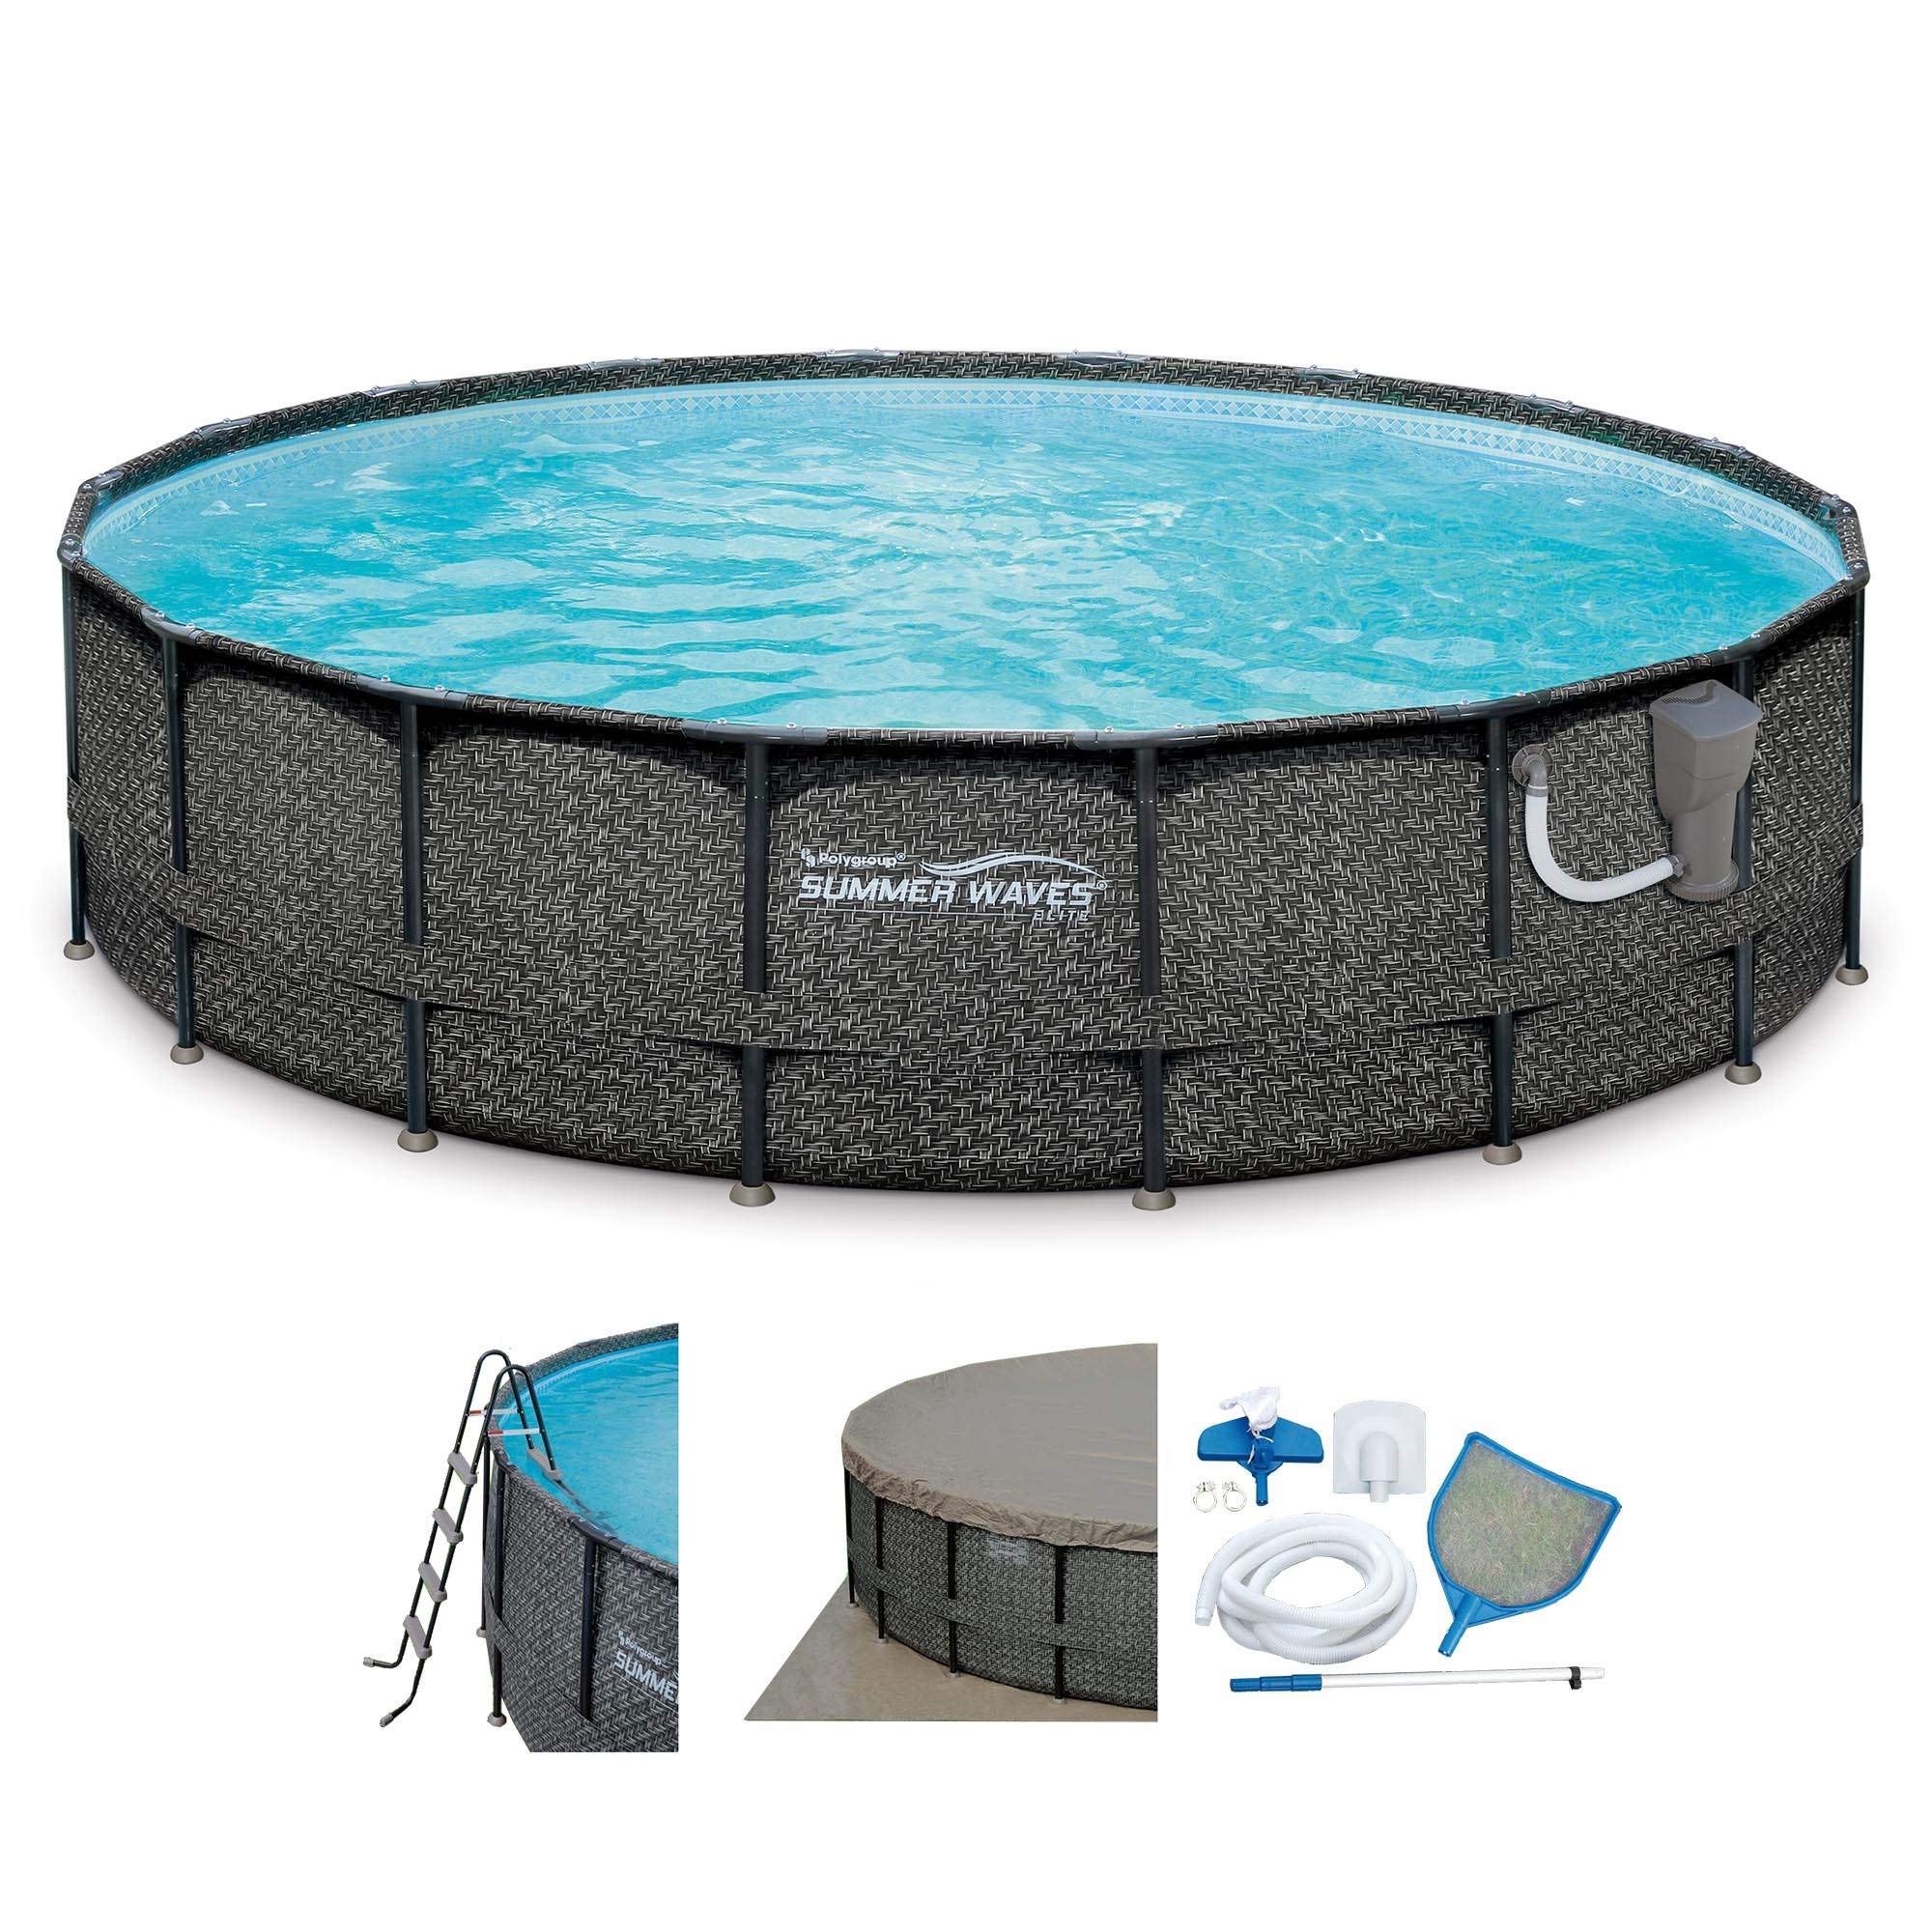 Summer Waves Elite P4A02048B 20ft x 48in Above Ground Frame Swimming Pool Set